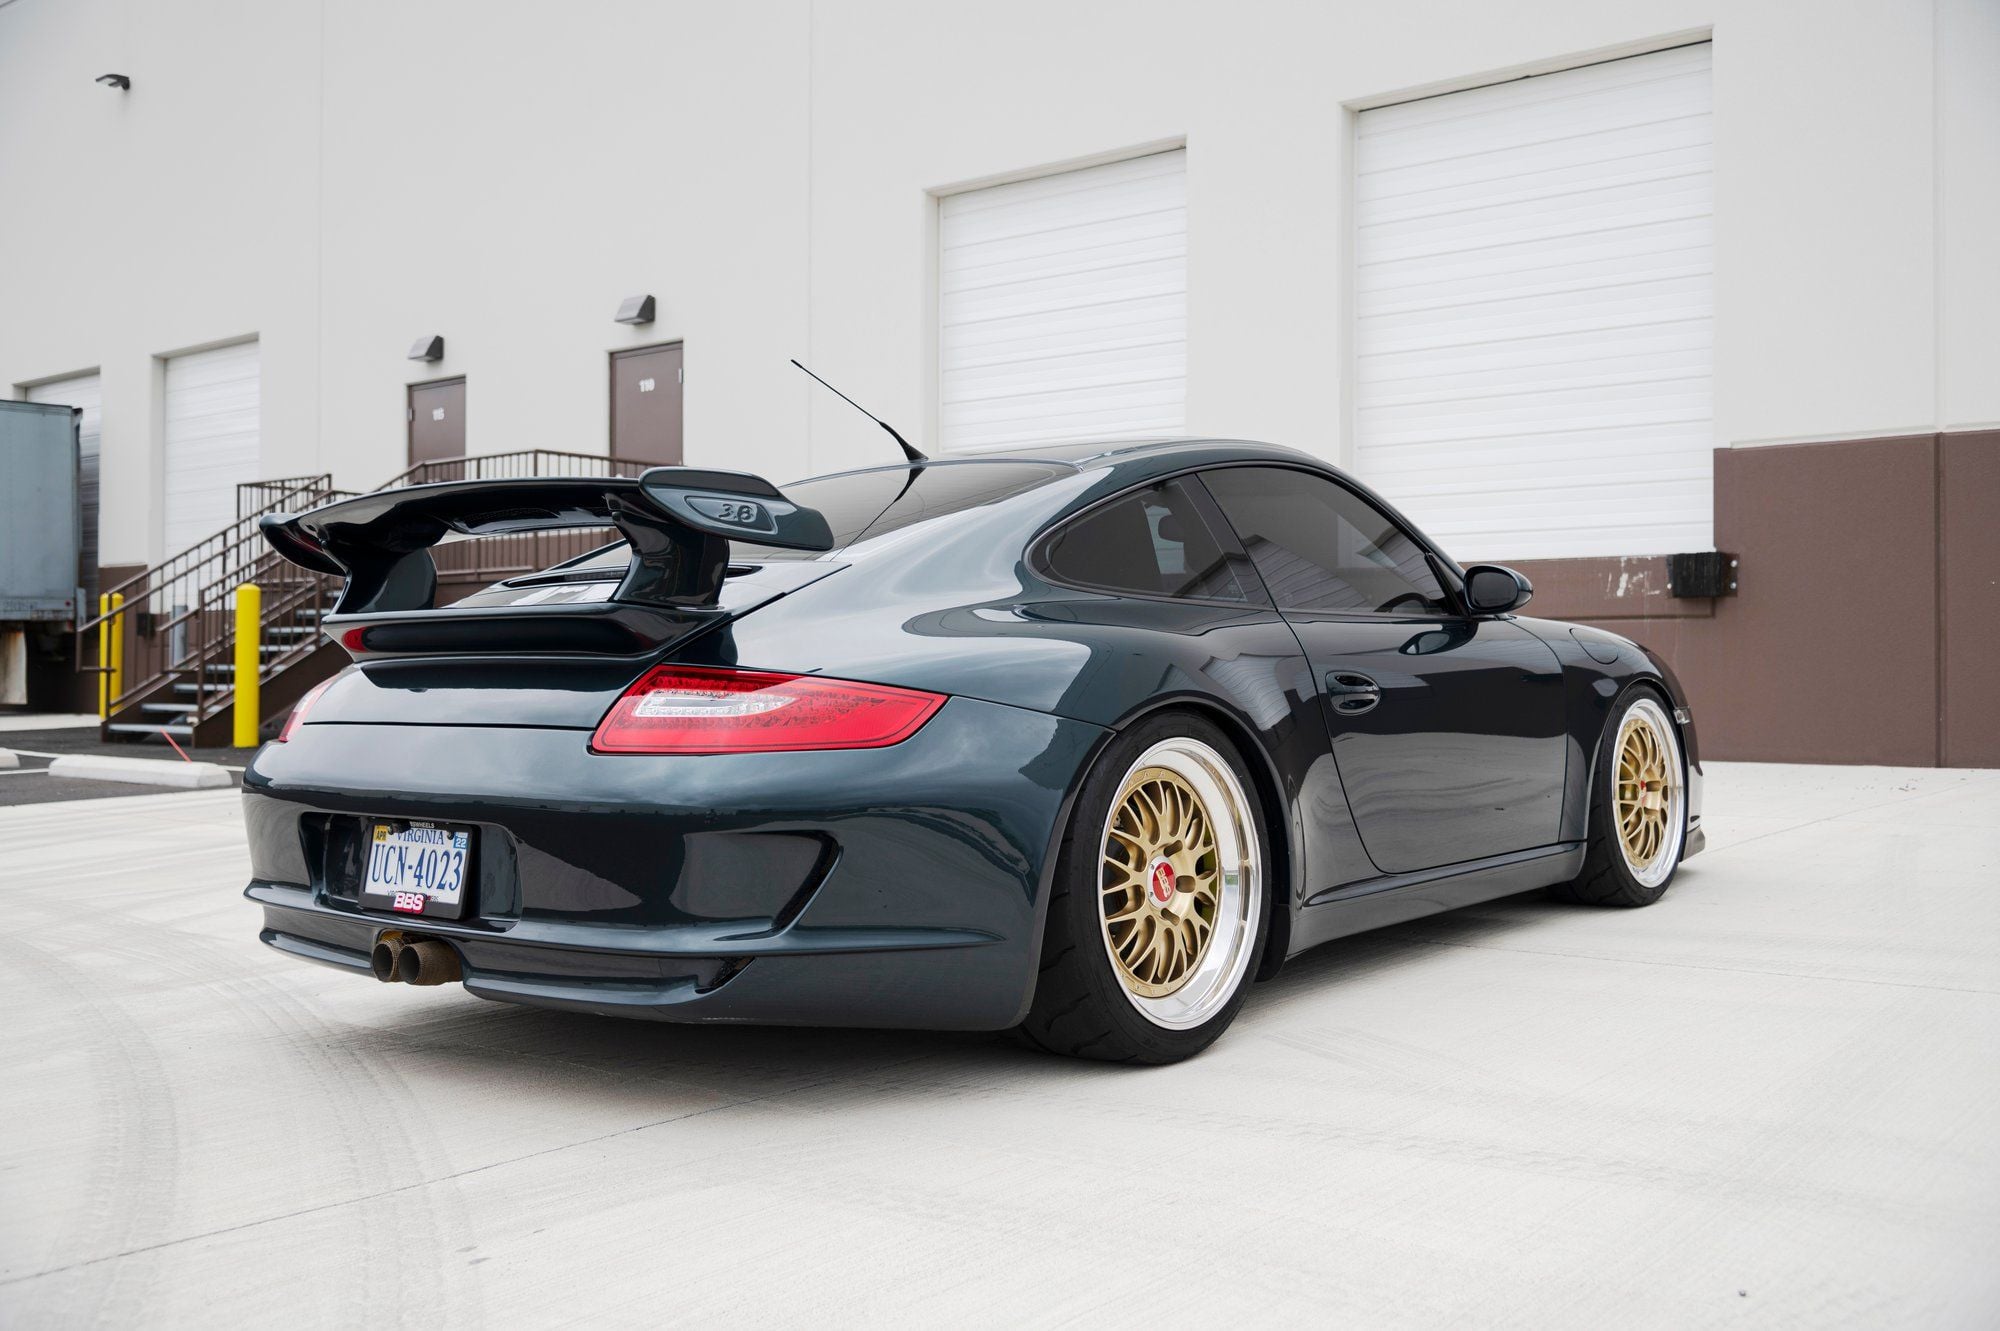 2005 Porsche 911 - Green 997- Coupe, Manual transmission for sale. - Used - VIN WP0AA29945S716572 - 40,500 Miles - 6 cyl - 2WD - Manual - Coupe - Other - Plano, TX 75093, United States